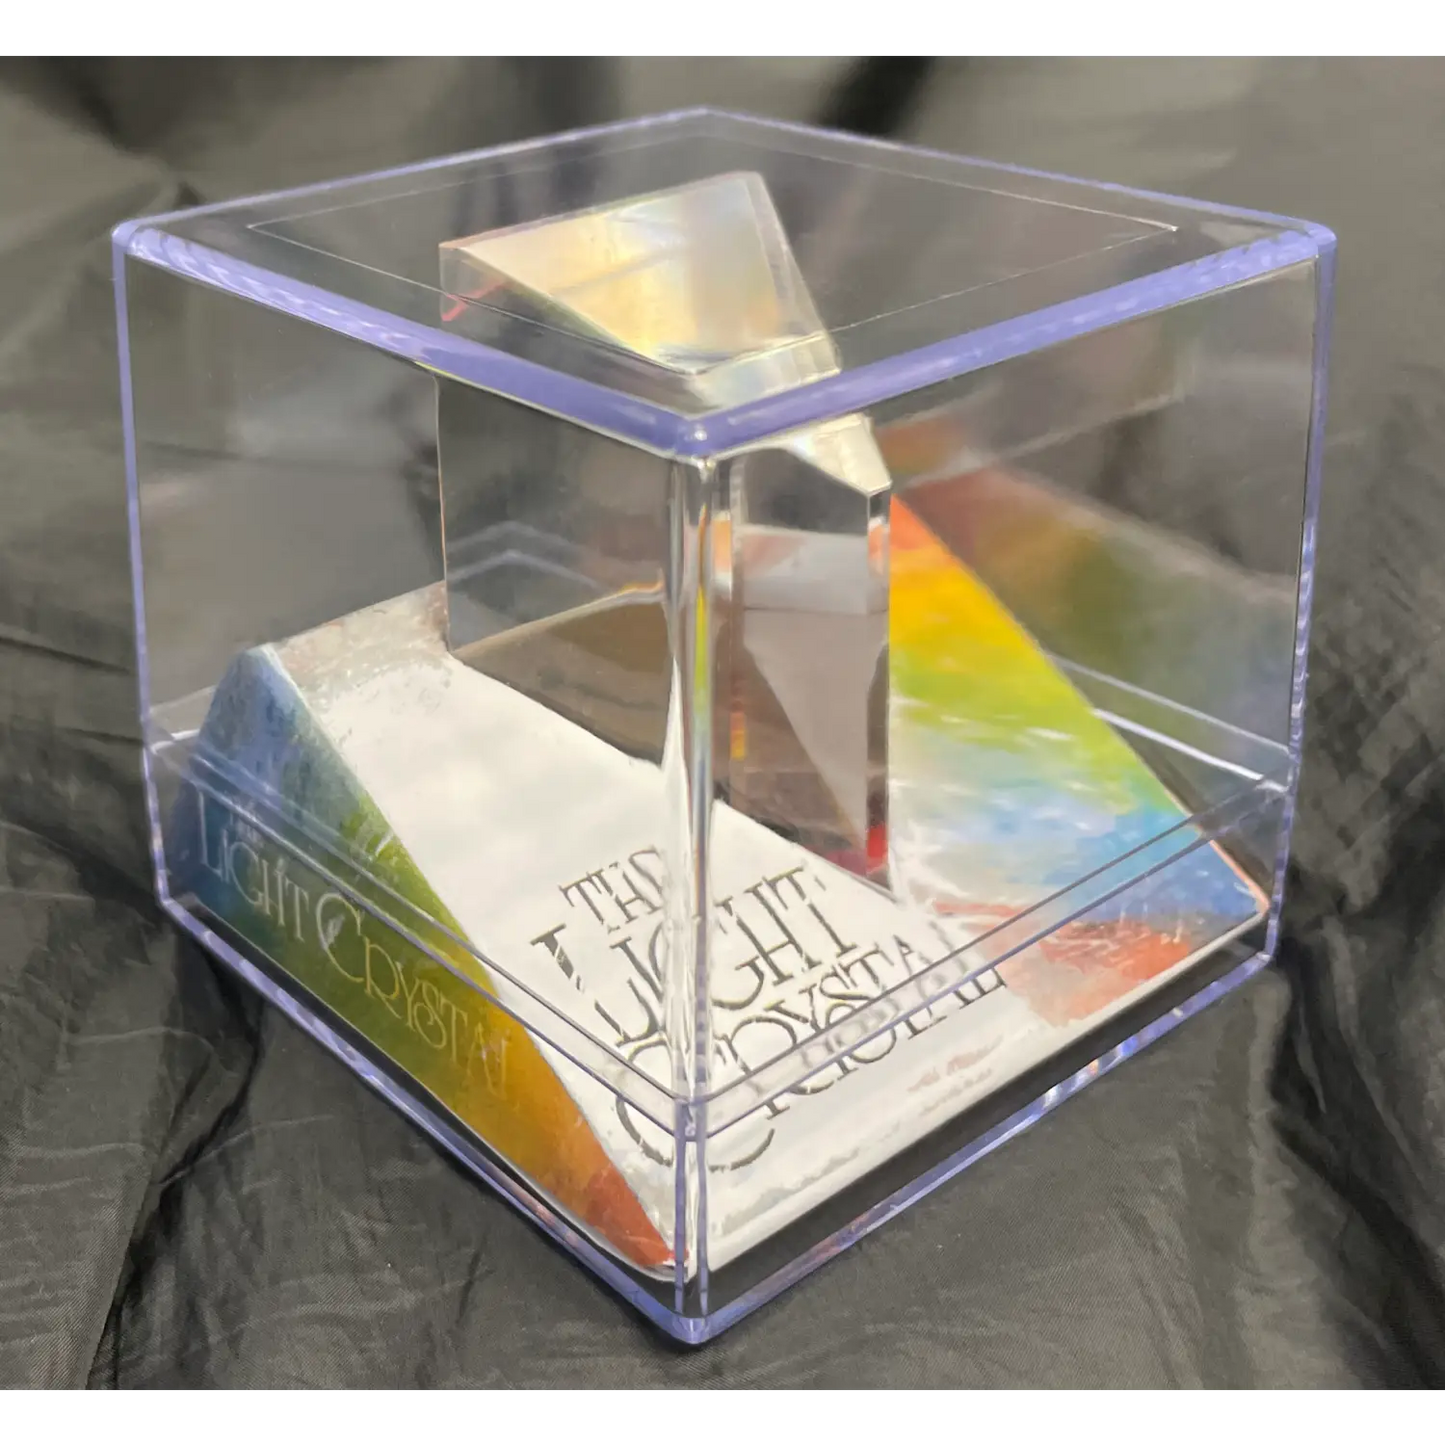 TEDCO Toys - Light Crystal Prism 2.5